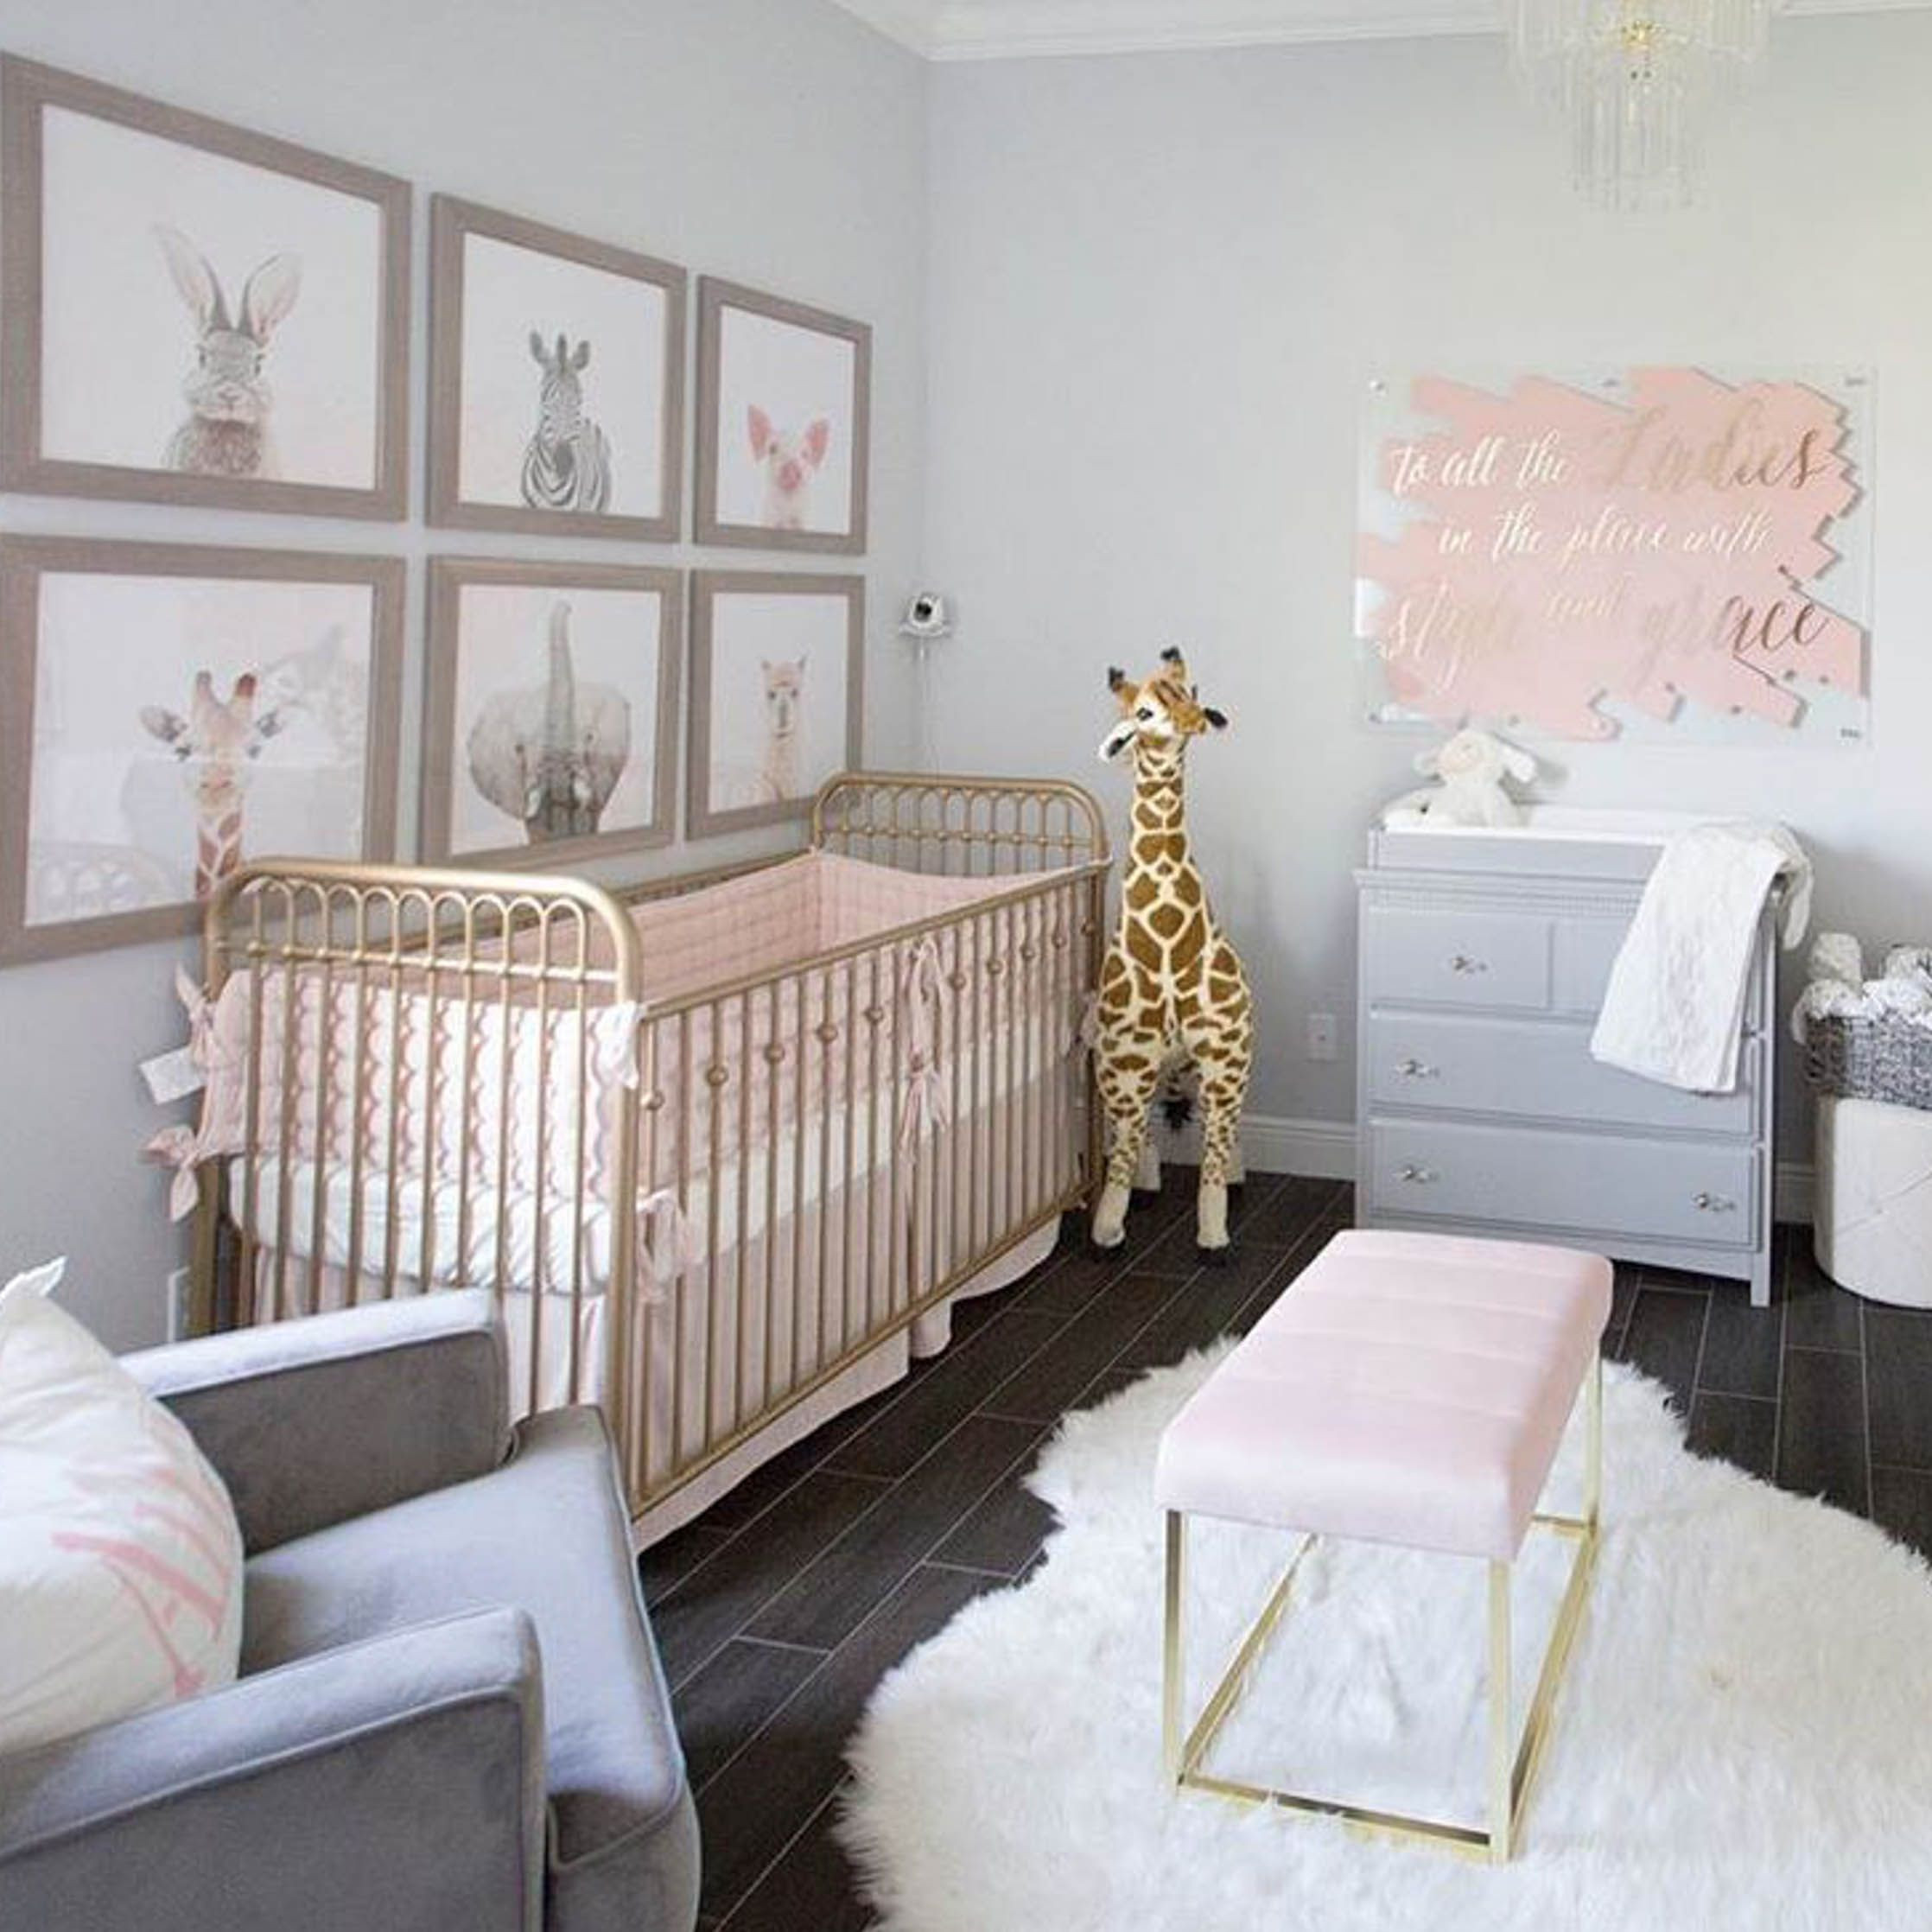 Newborn Baby Girl Room Decoration
 Here s What s Trending in the Nursery